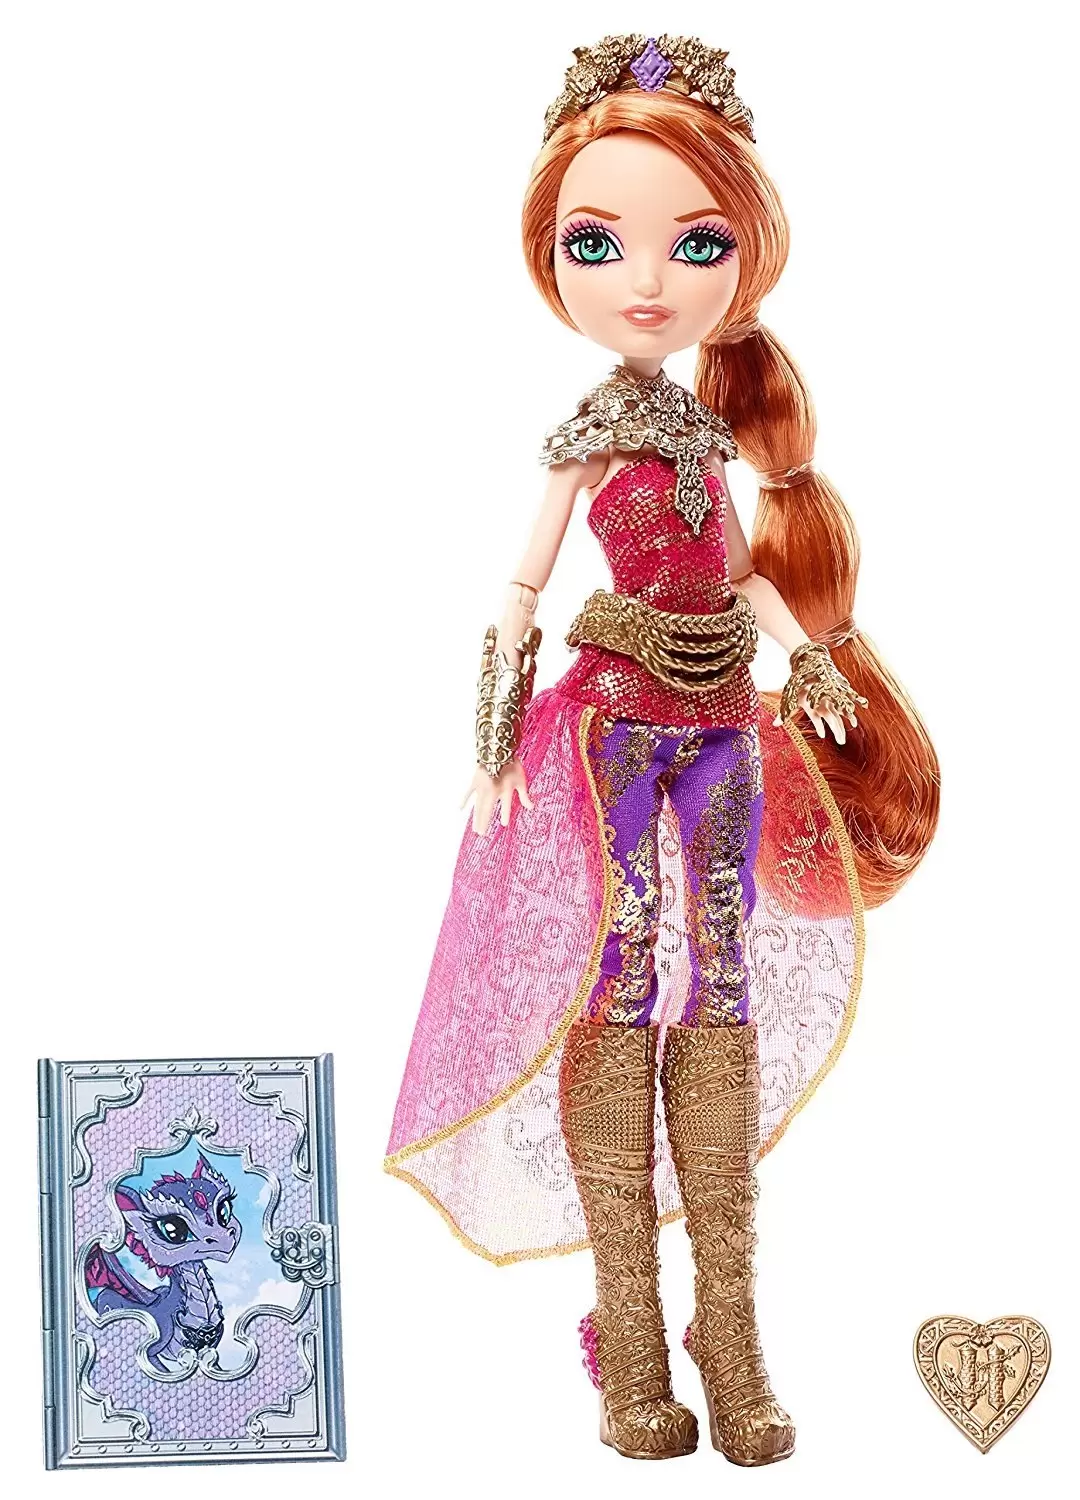 Holly o' Hair - Dragon Games - Ever After High Dolls